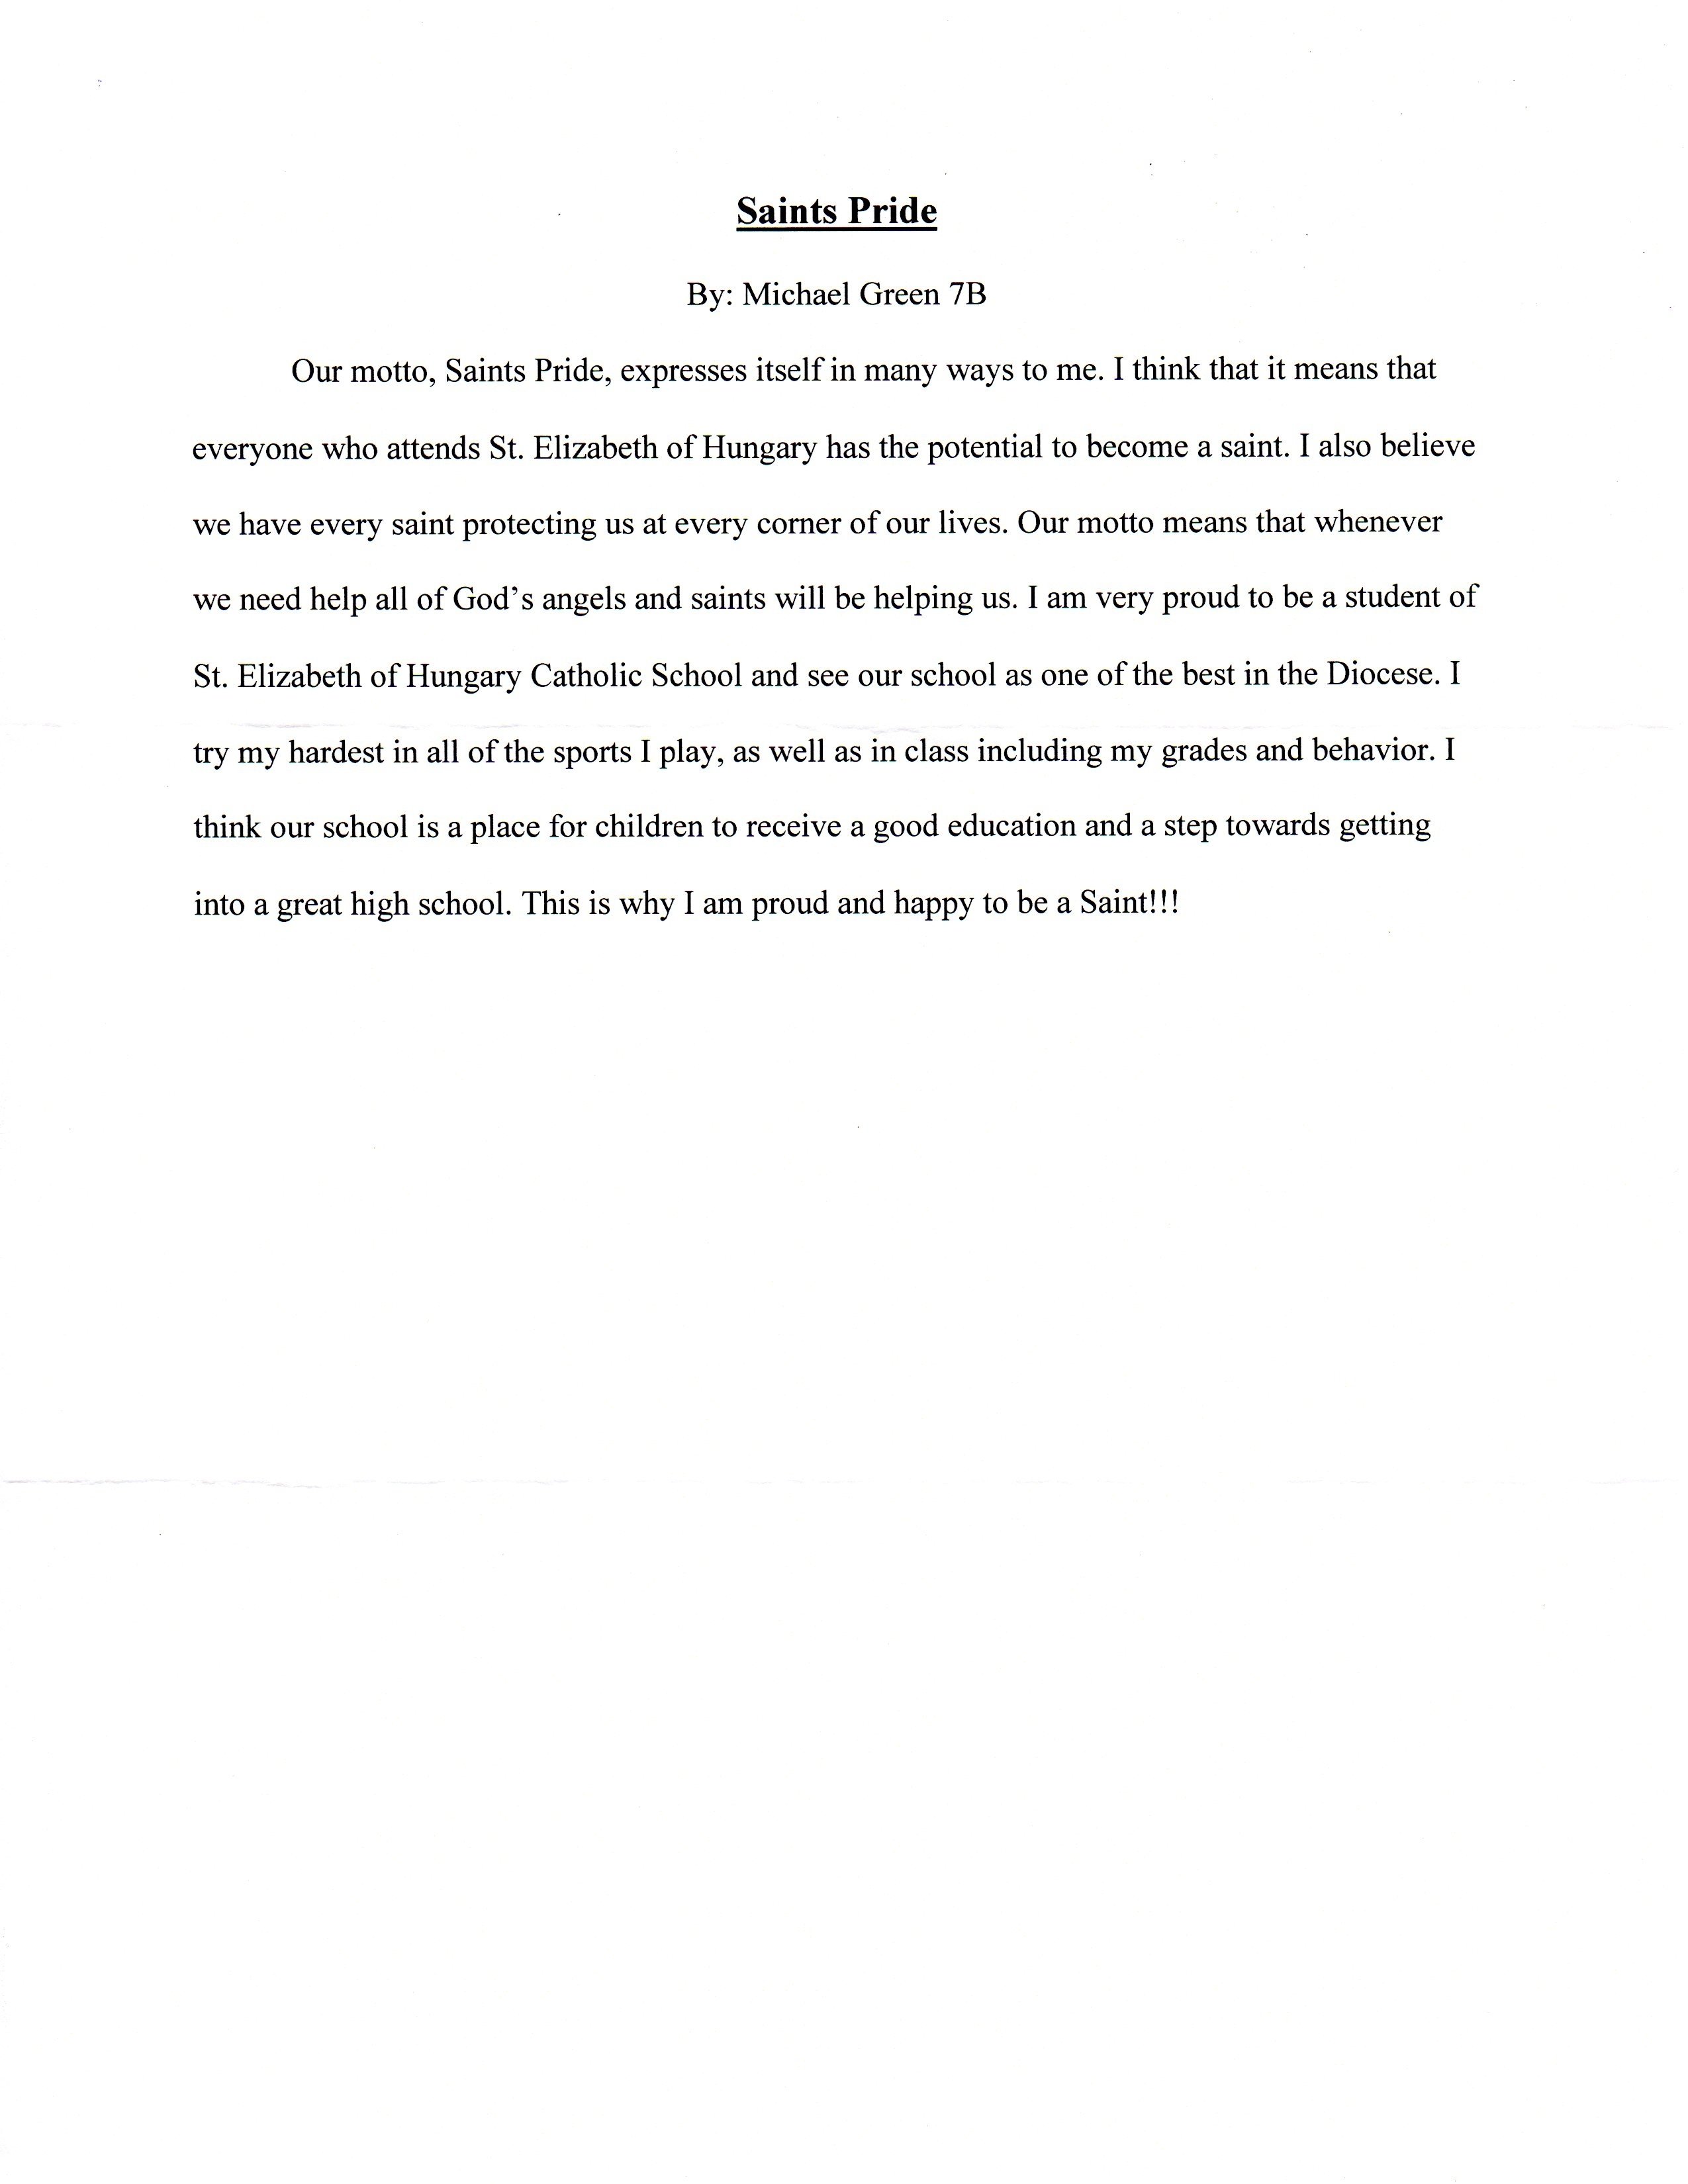 10 Fantastic Ideas For Student Council Speeches essay about student discuss write good essays essay about student 2022